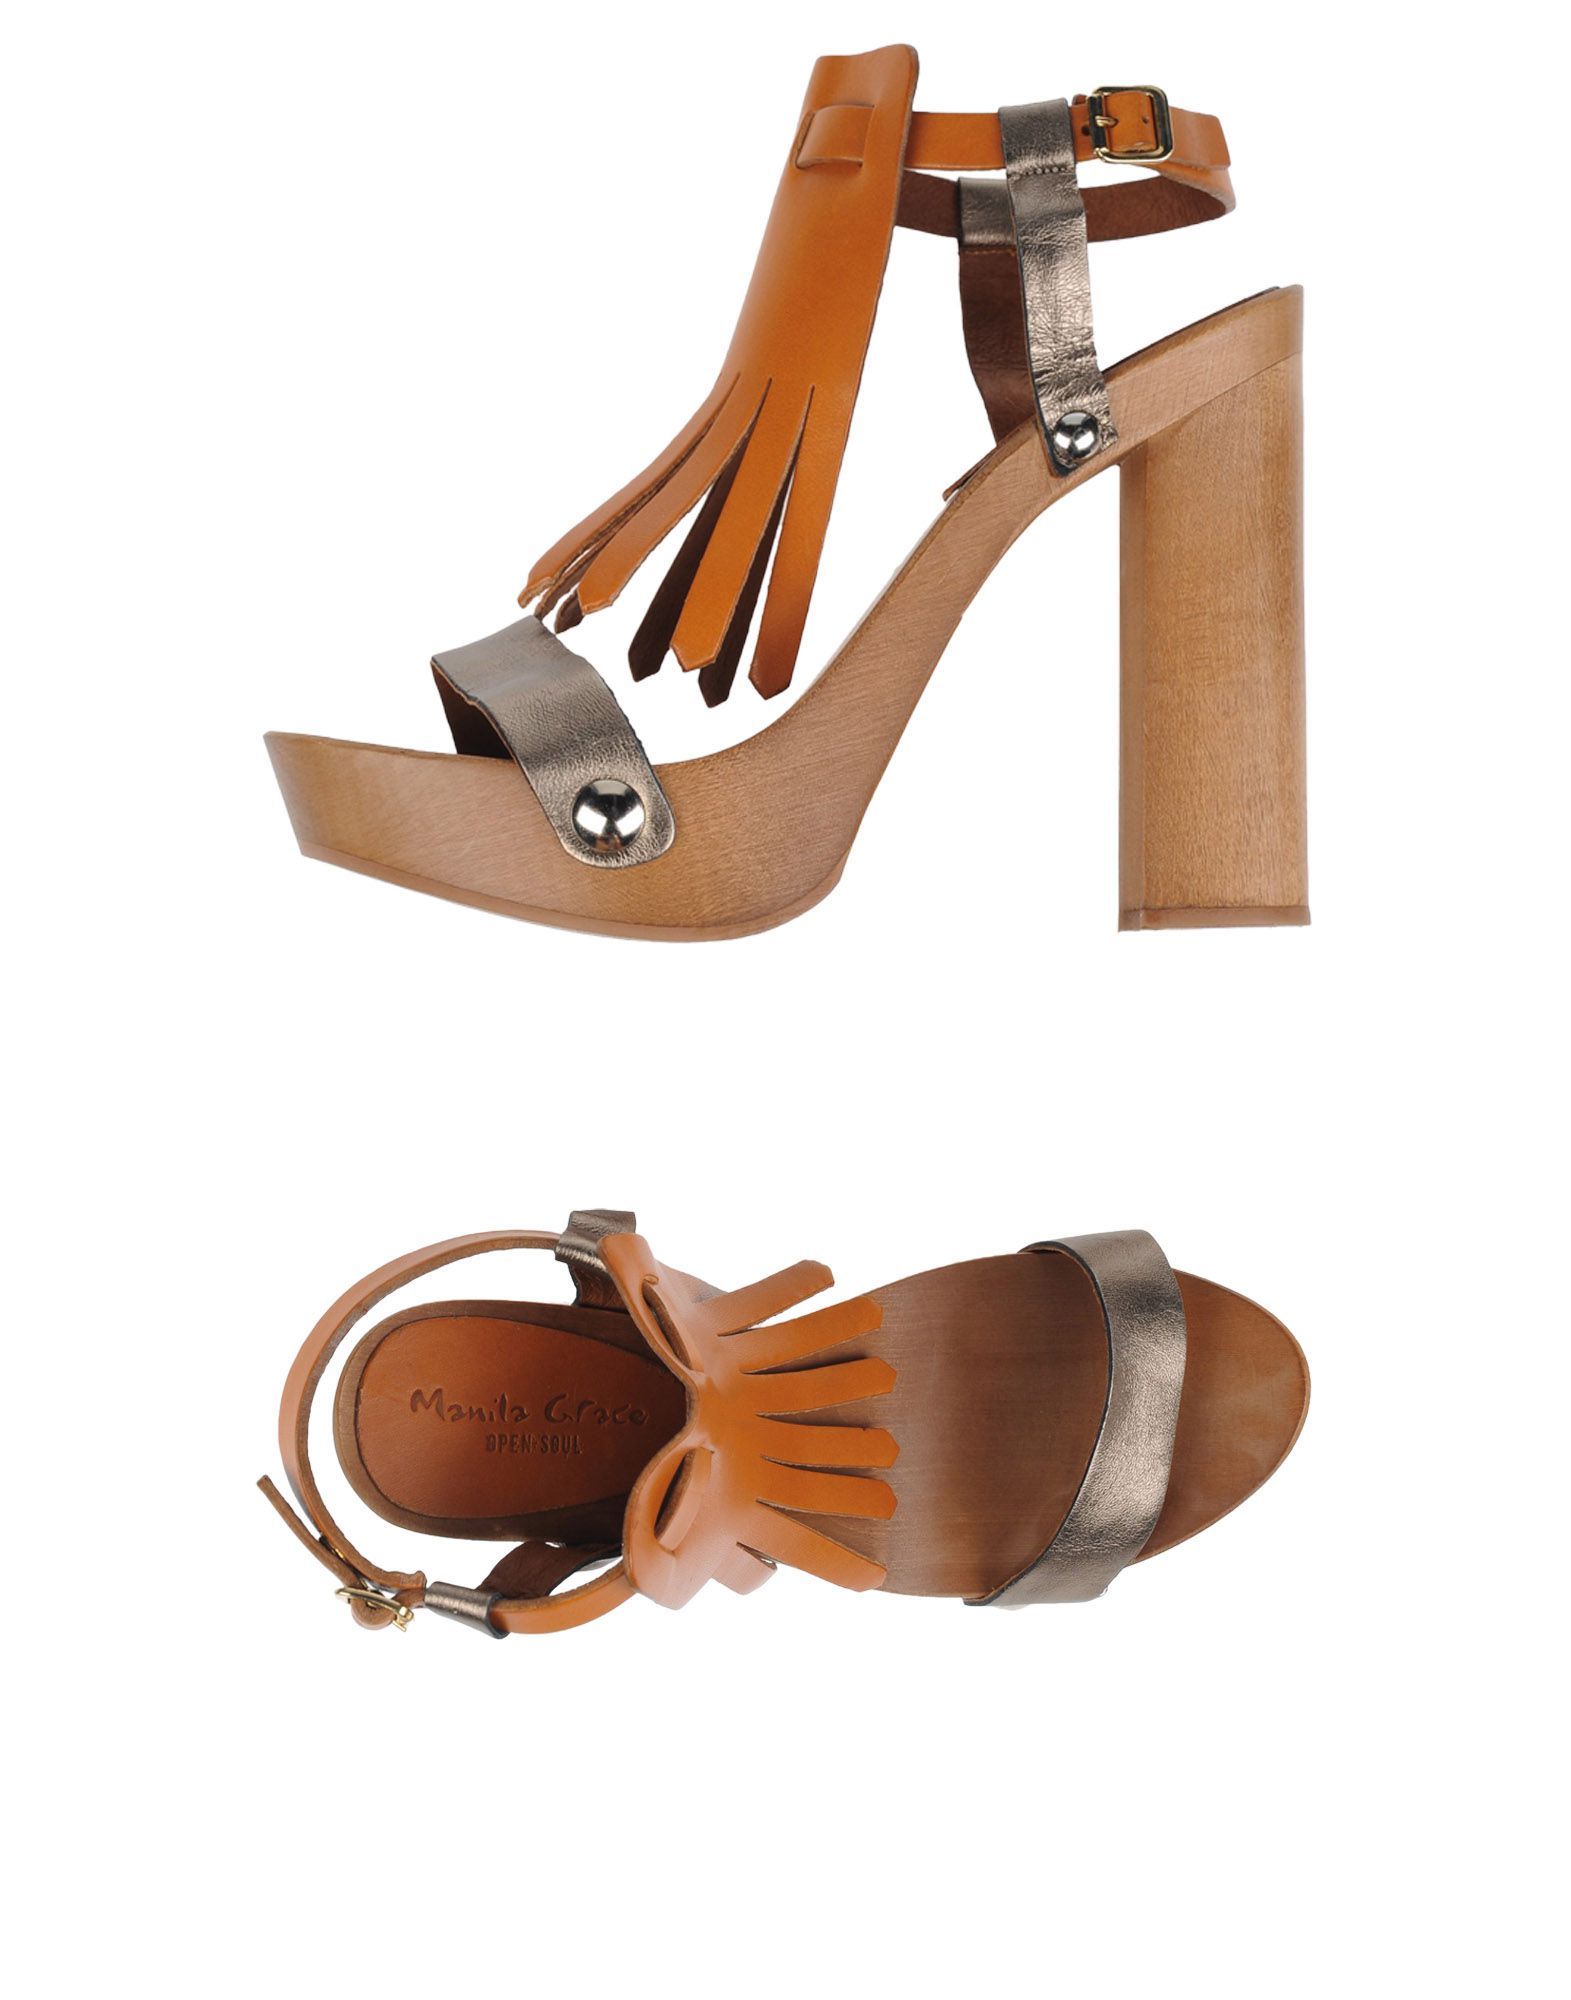 Fringe<br>Two-tone<br>Buckle<br>Round toeline<br>Leather lining<br>Rubber sole<br>Square heel<br>Wooden heel<br>Contains non-textile parts of animal origin<br>